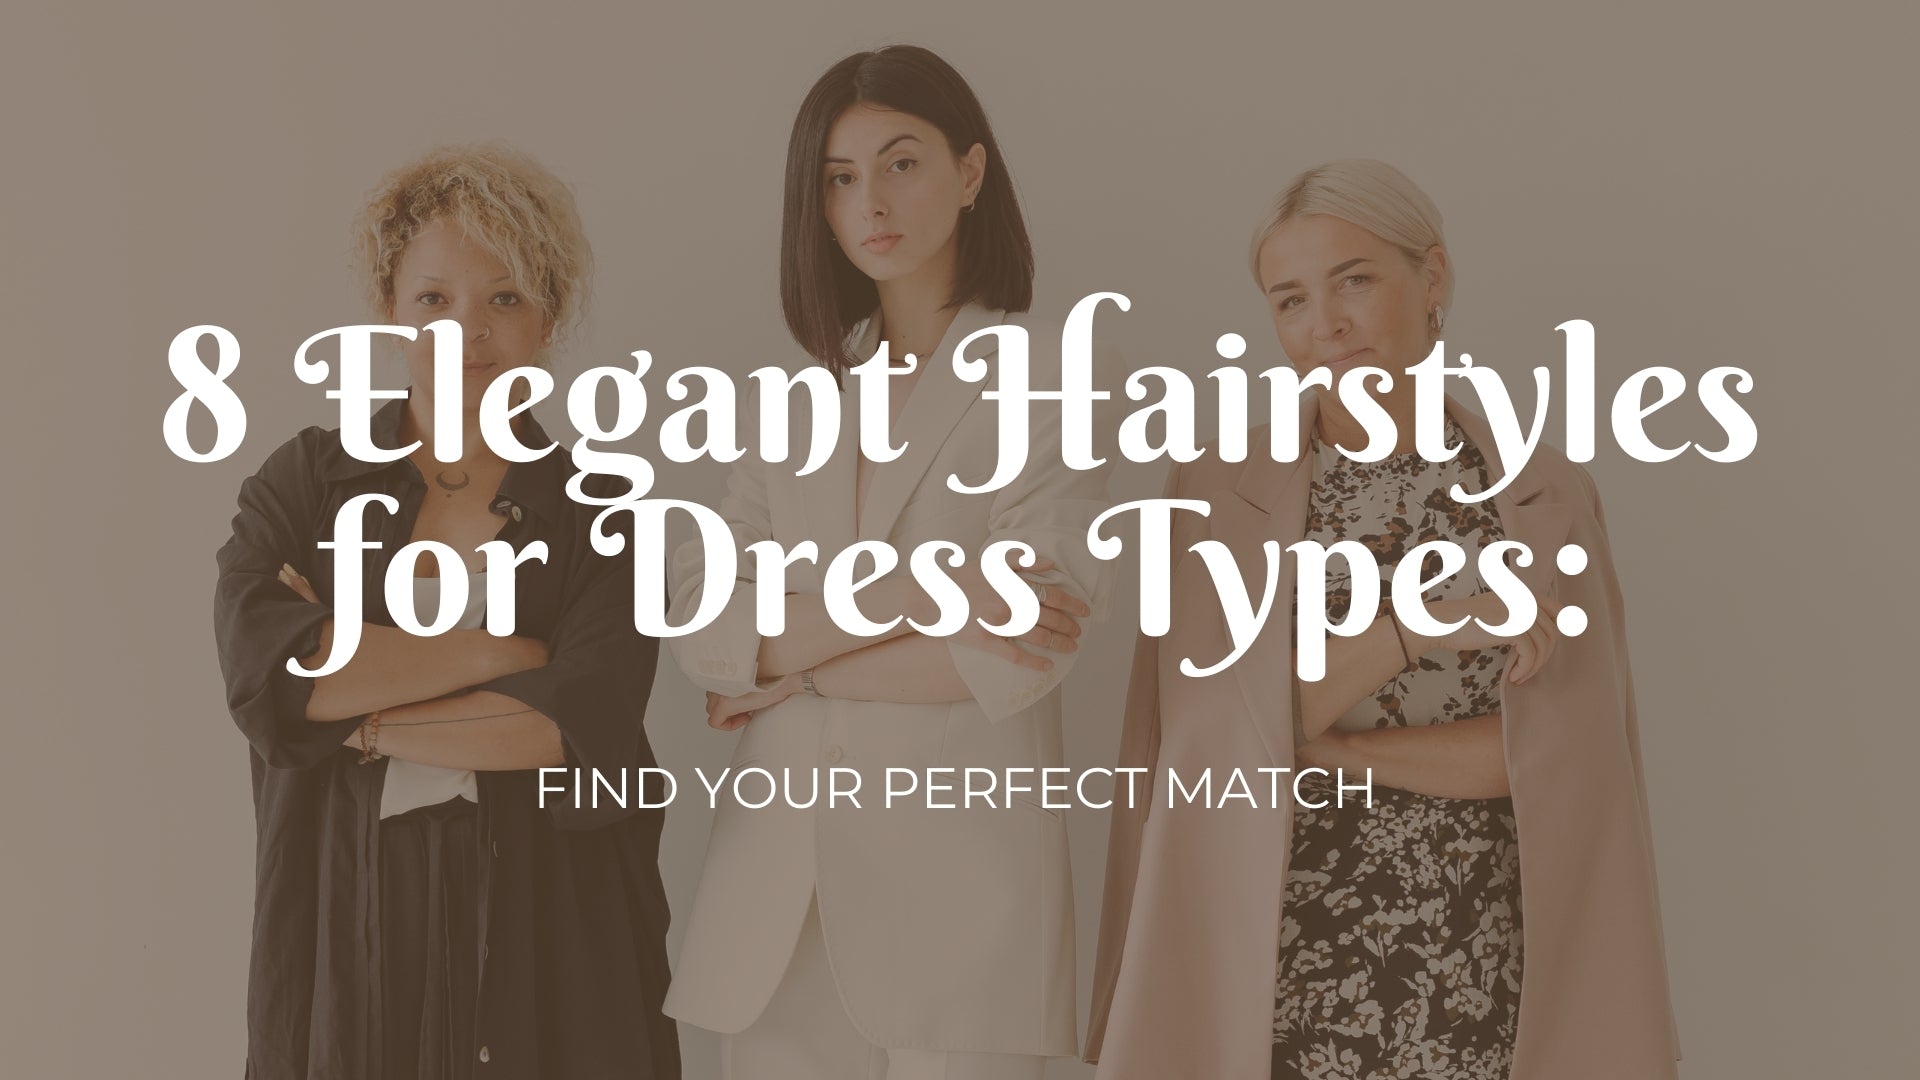 Hairstyles For Dress Types